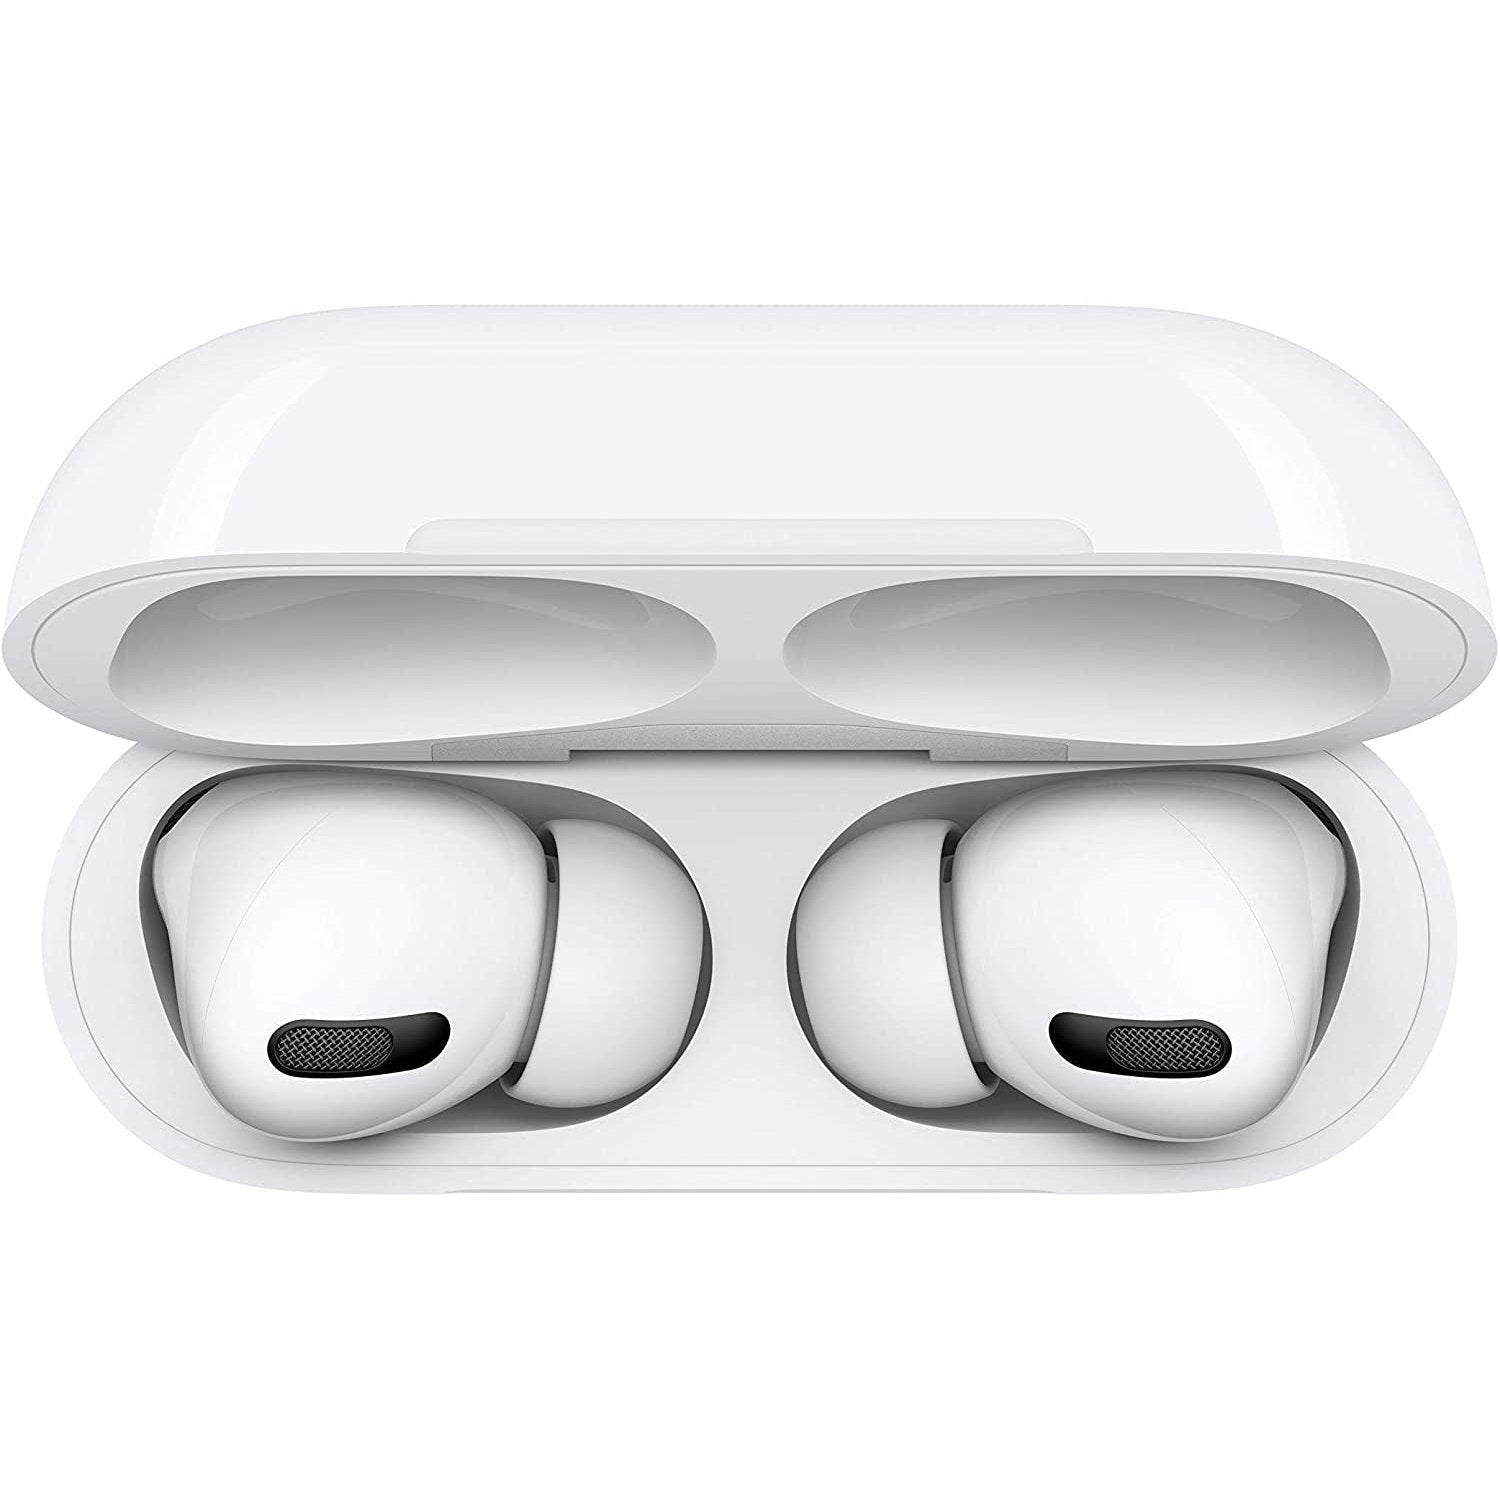 Apple AirPods Pro with Case MWP22AM/A (Refurbished)